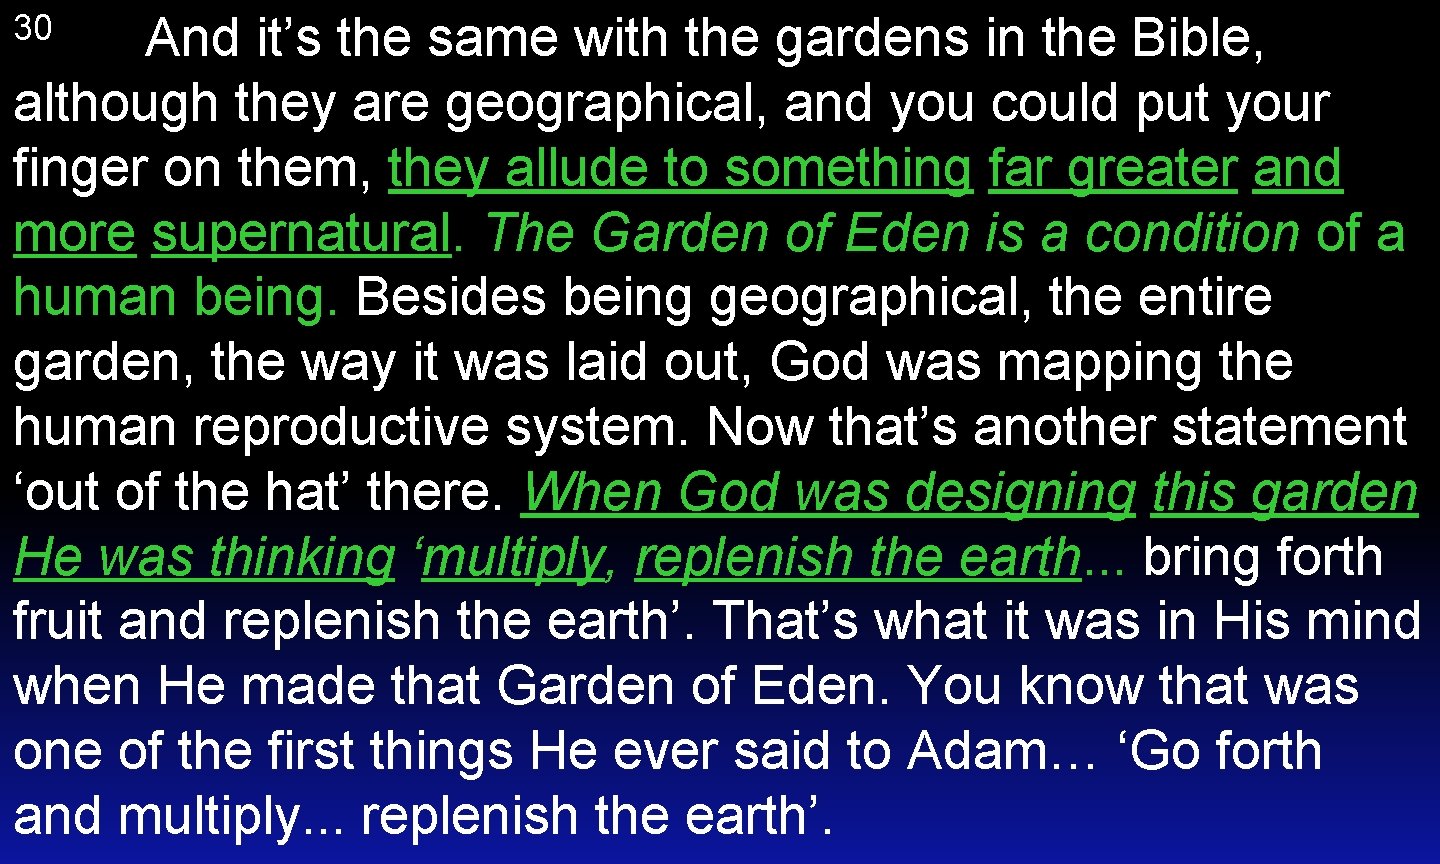 And it’s the same with the gardens in the Bible, although they are geographical,